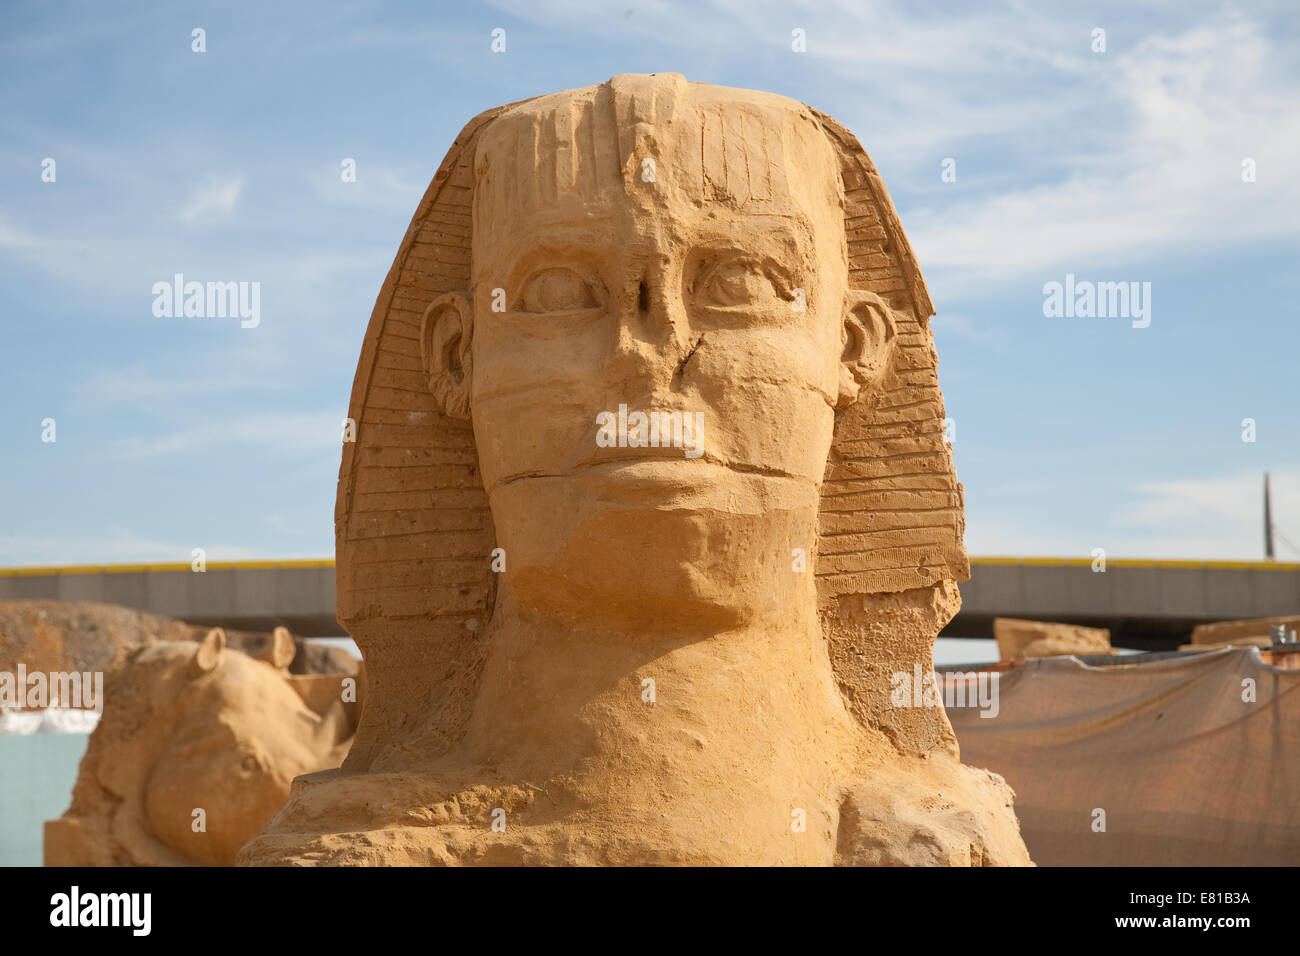 The Sphinx of Giza in Egypt on display at the Sand Sculpture festival in Brighton Stock Photo